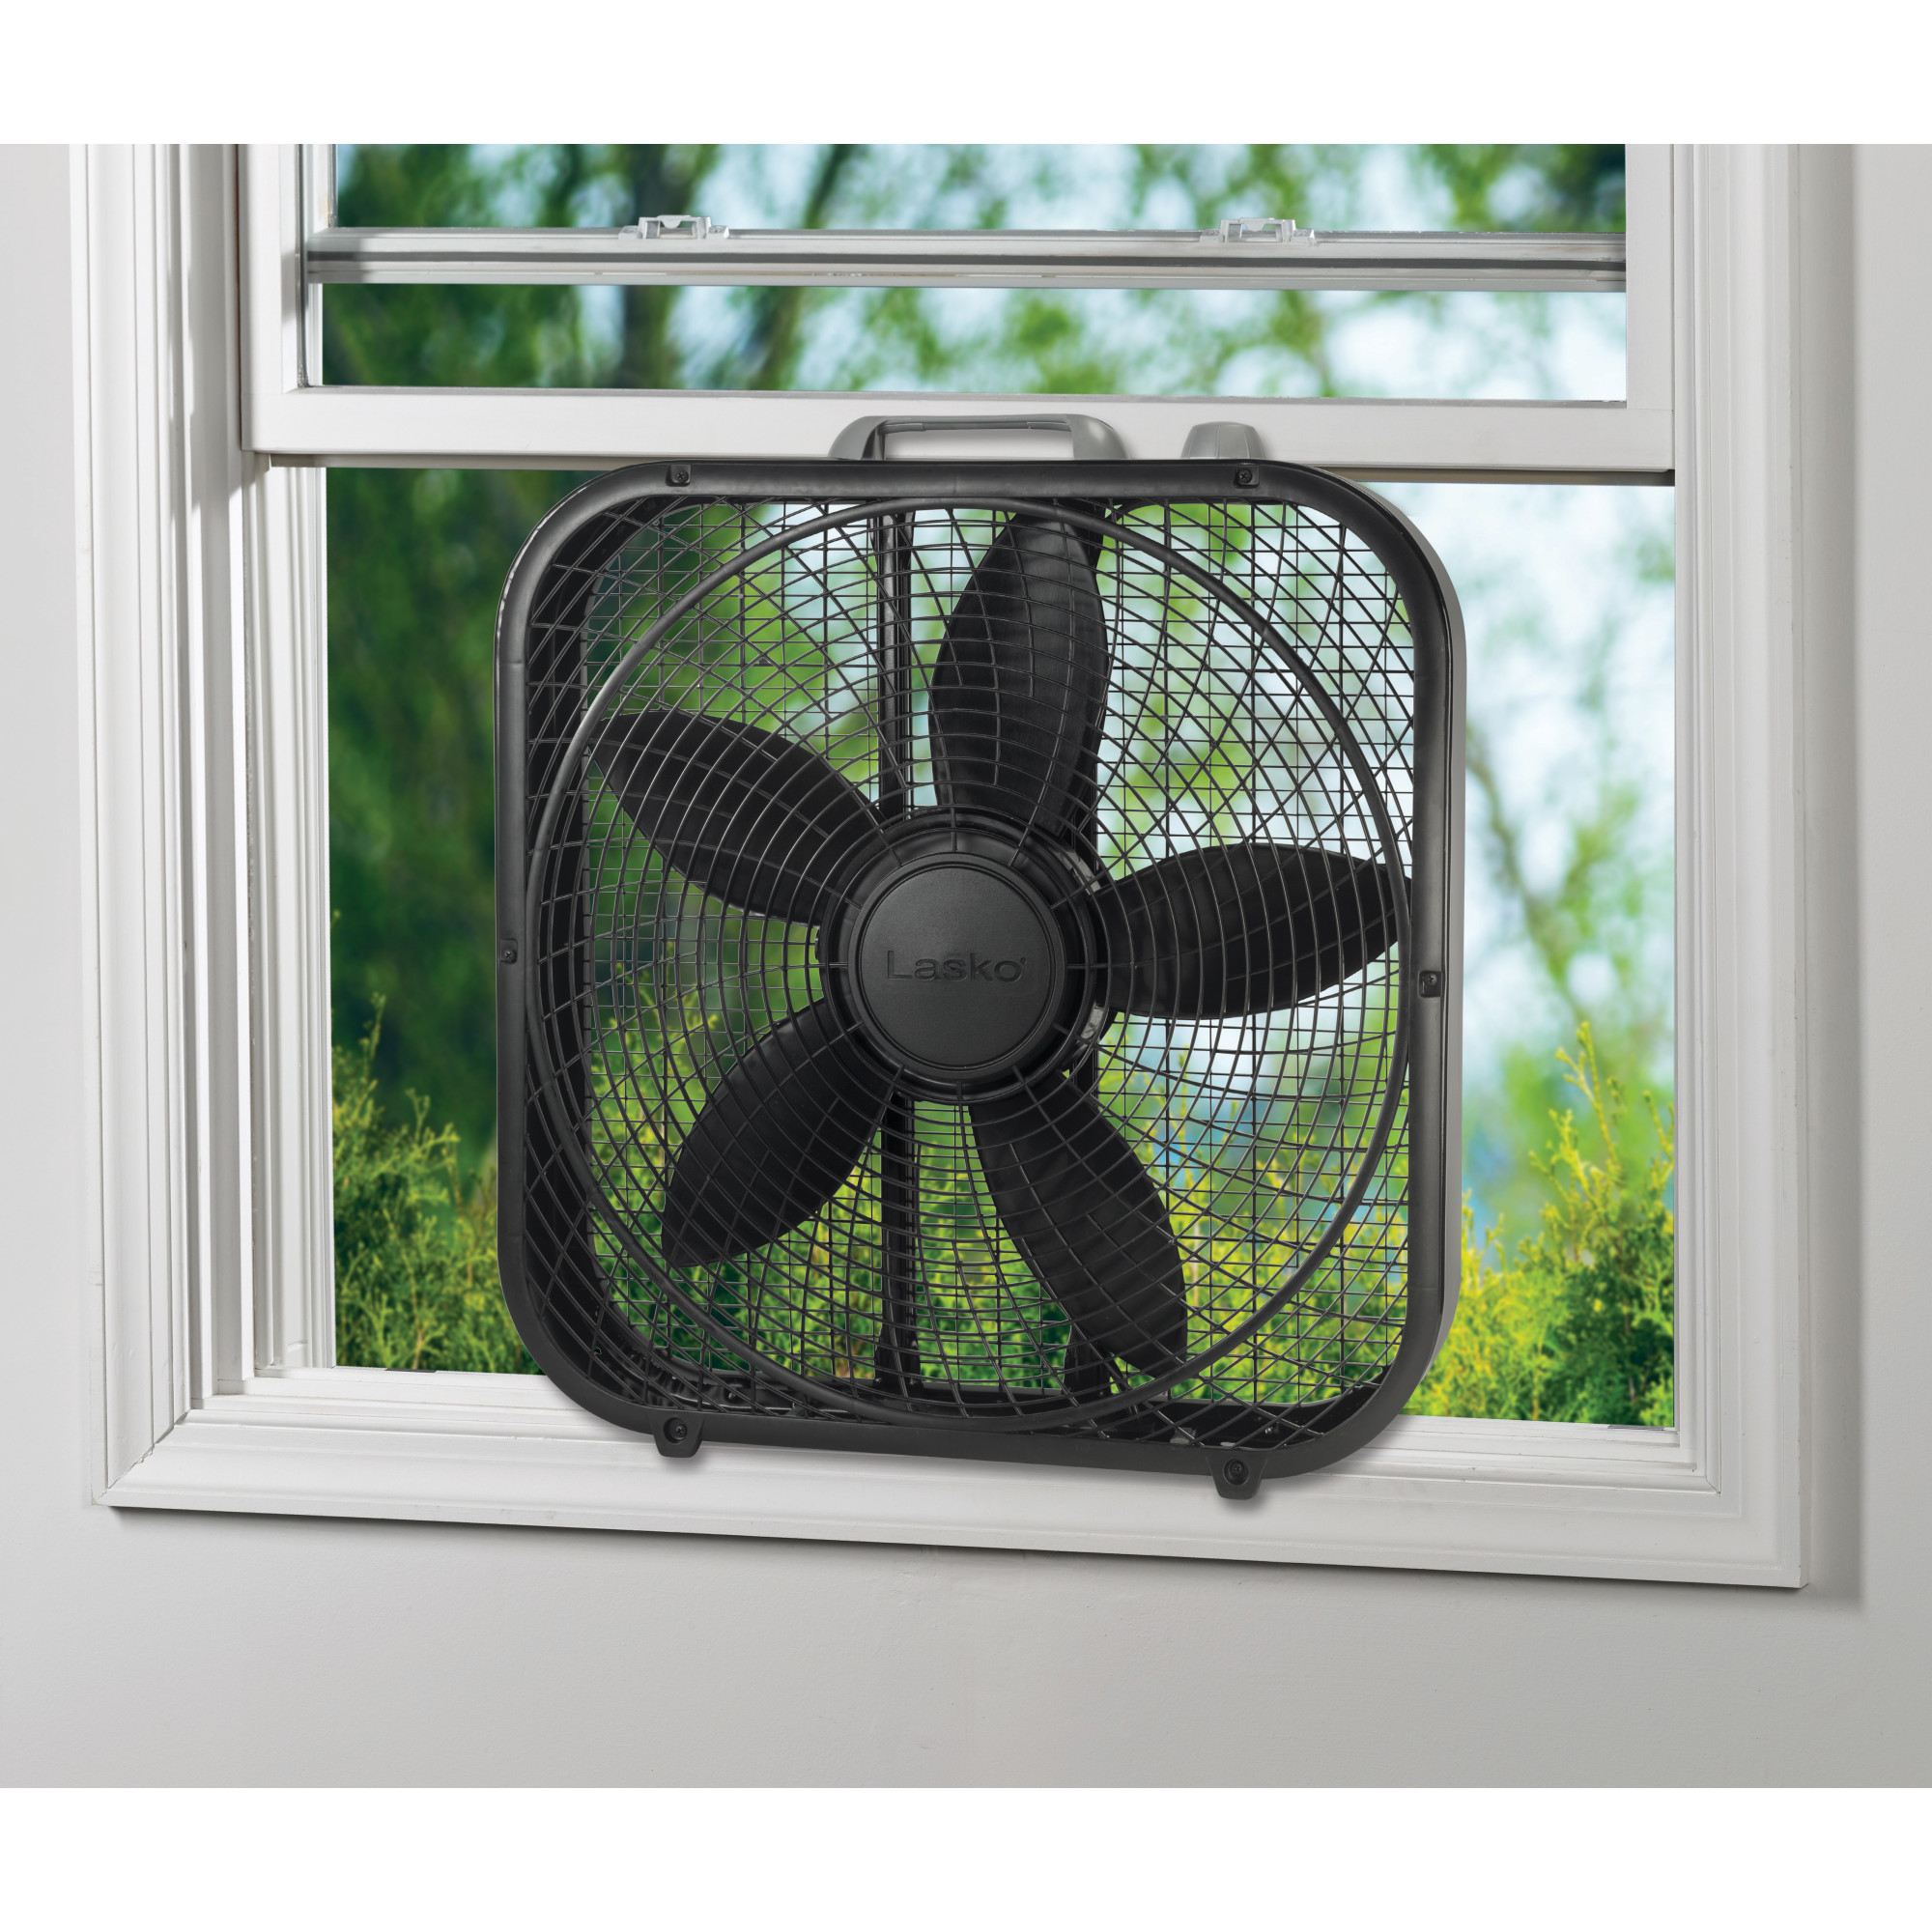 Lasko Cool Colors 20" Weather Resistant Box Fan, with 3-Speeds, 22" H,  Black, B20301, New - image 3 of 5